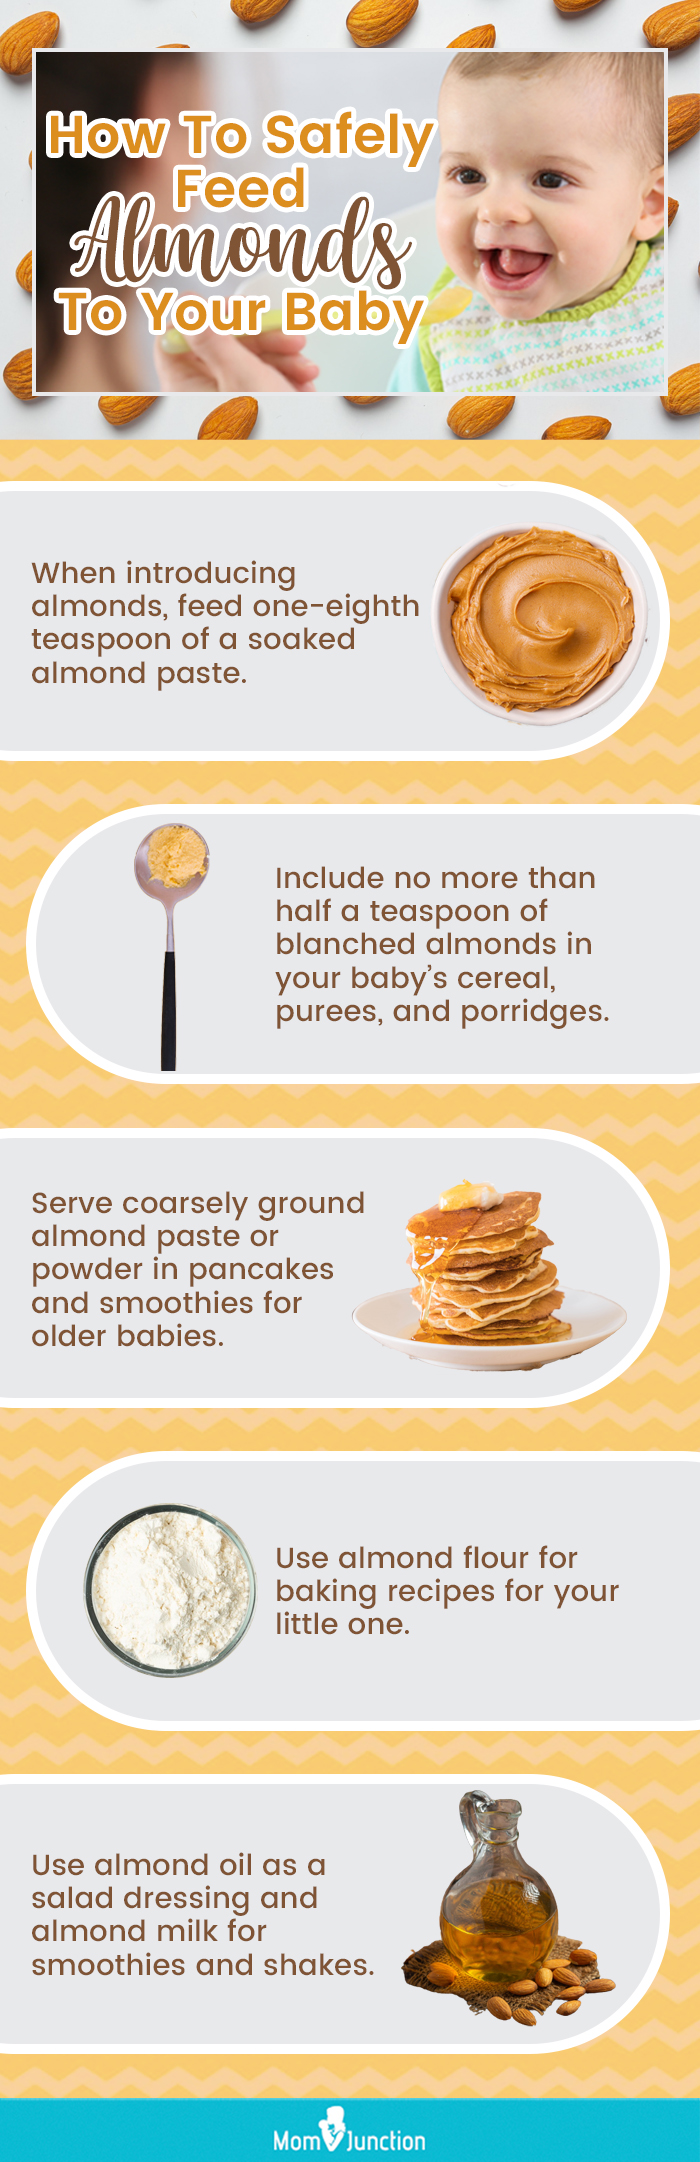 how to safely feed almonds to your baby [infographic]